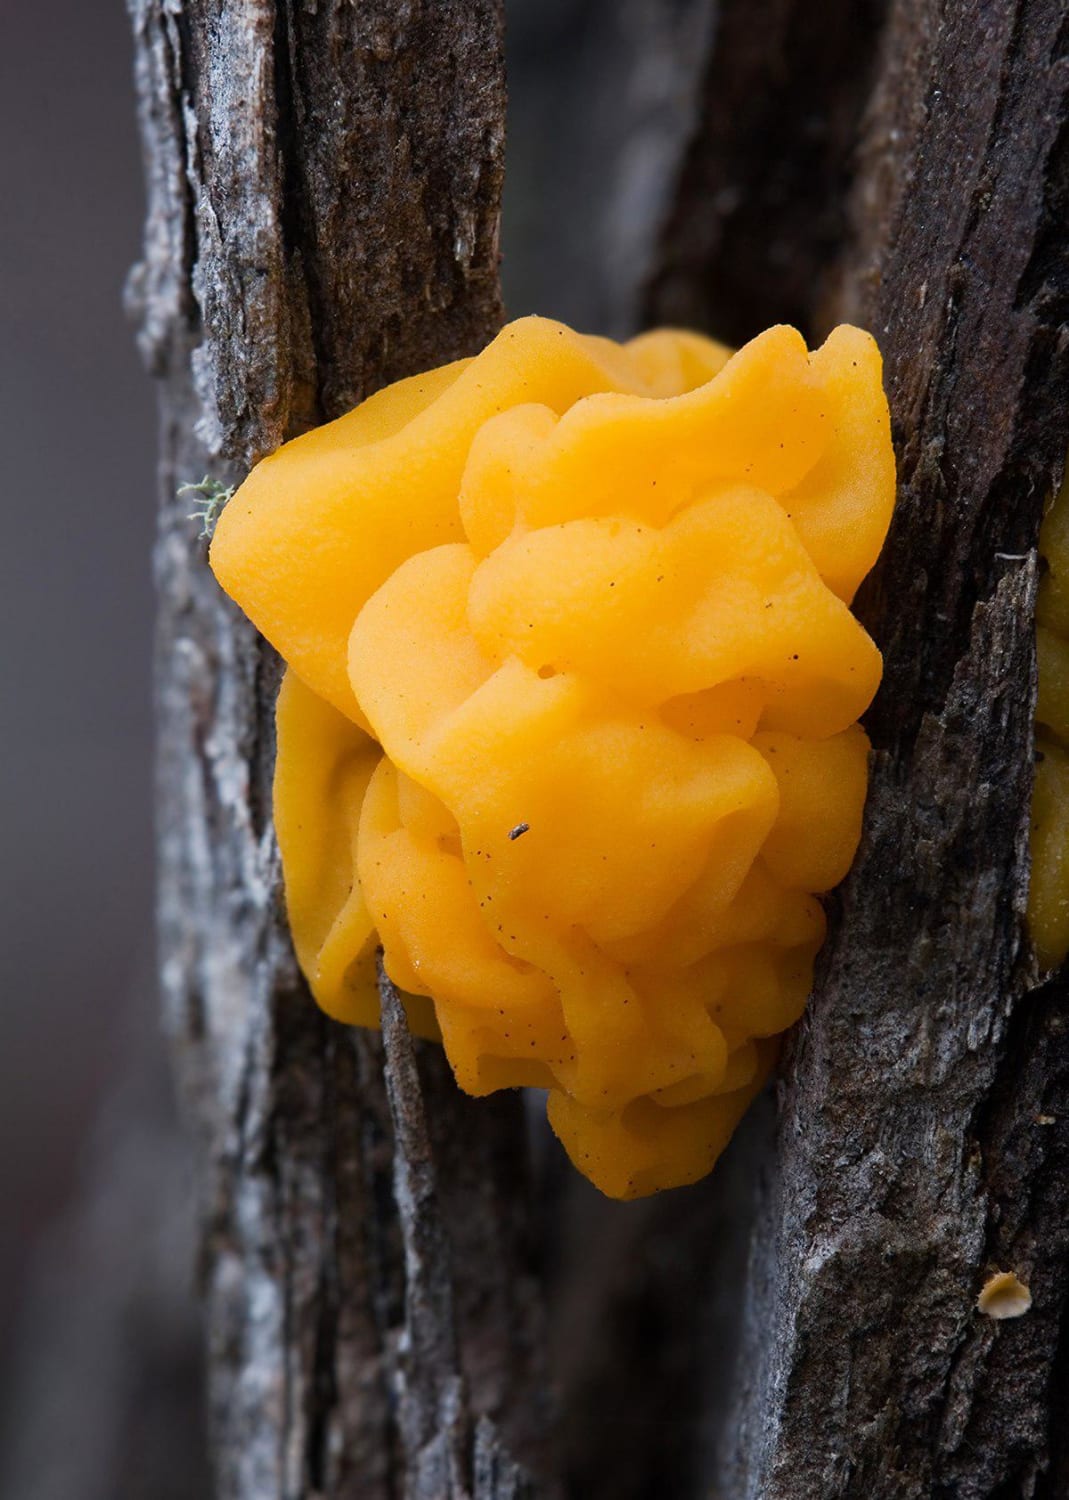 Witches' butter